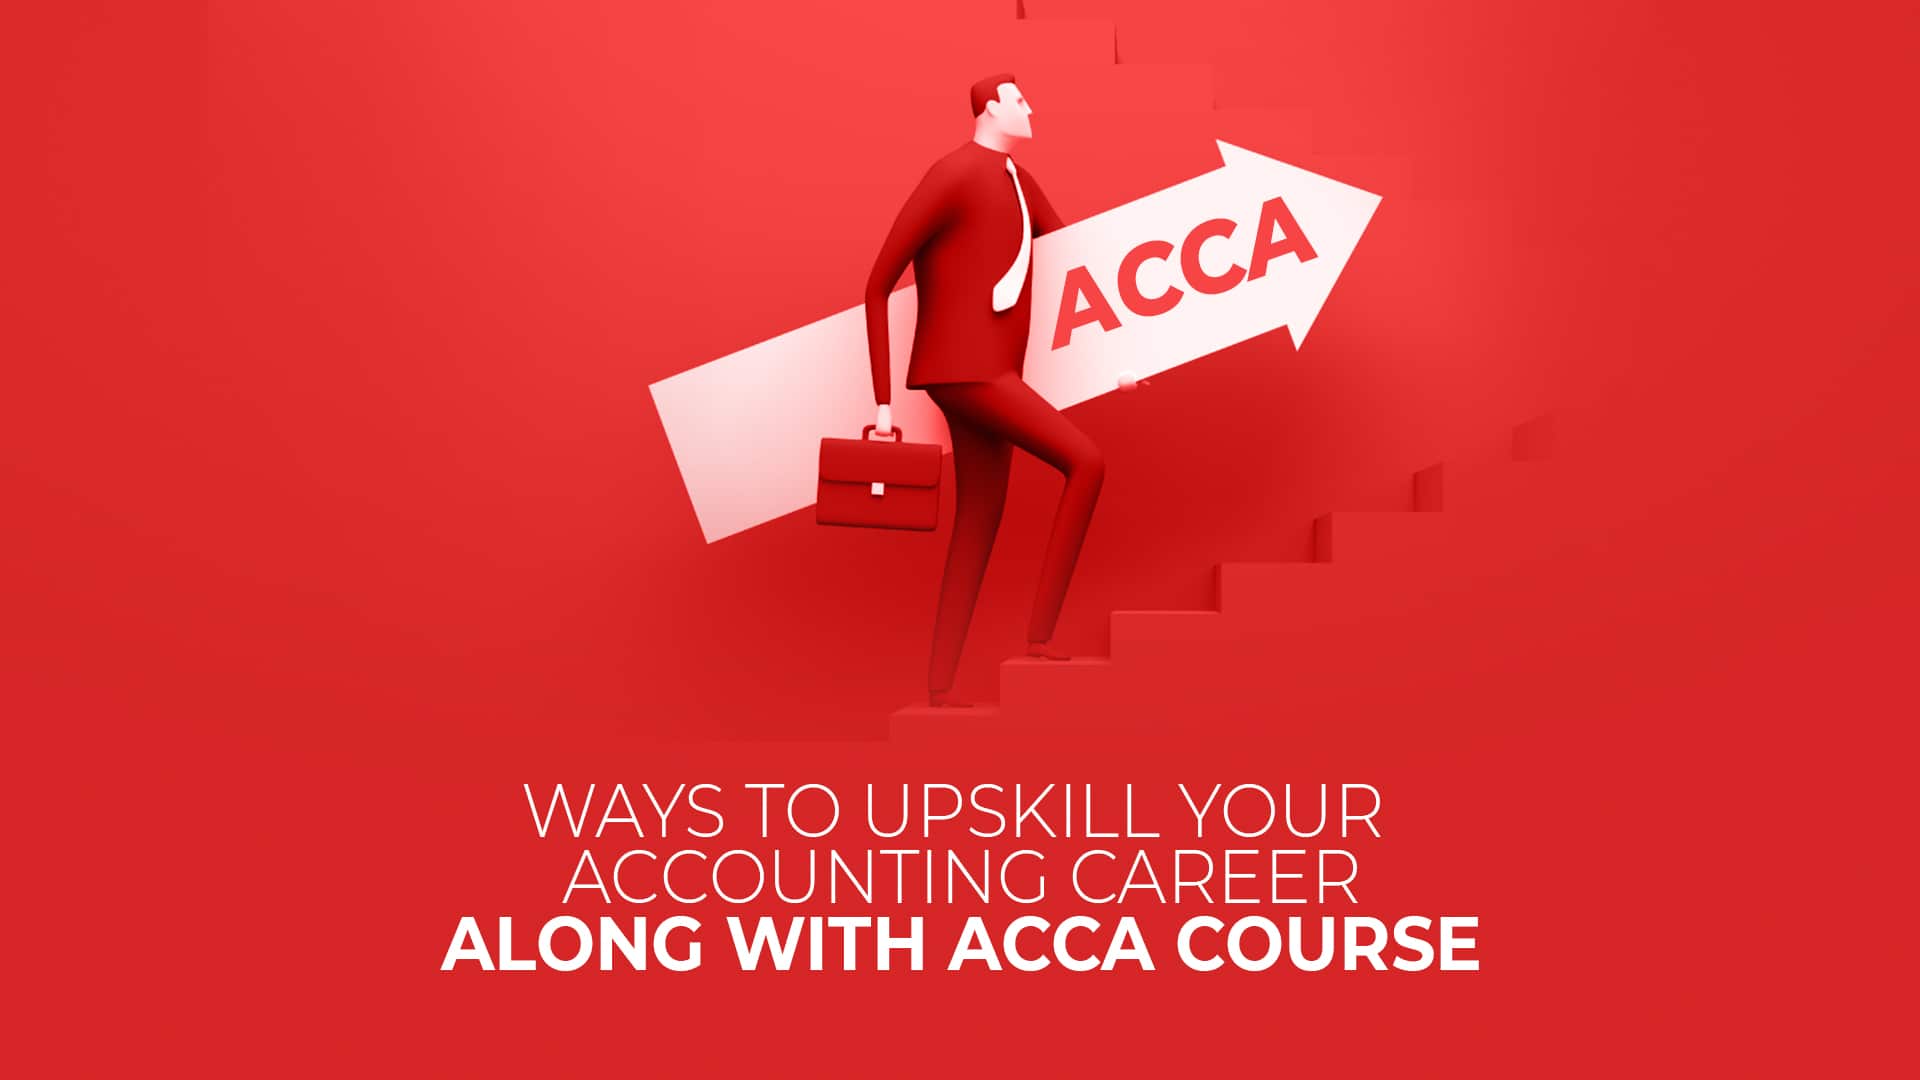 Ways to upskill your accounting career along with an ACCA course